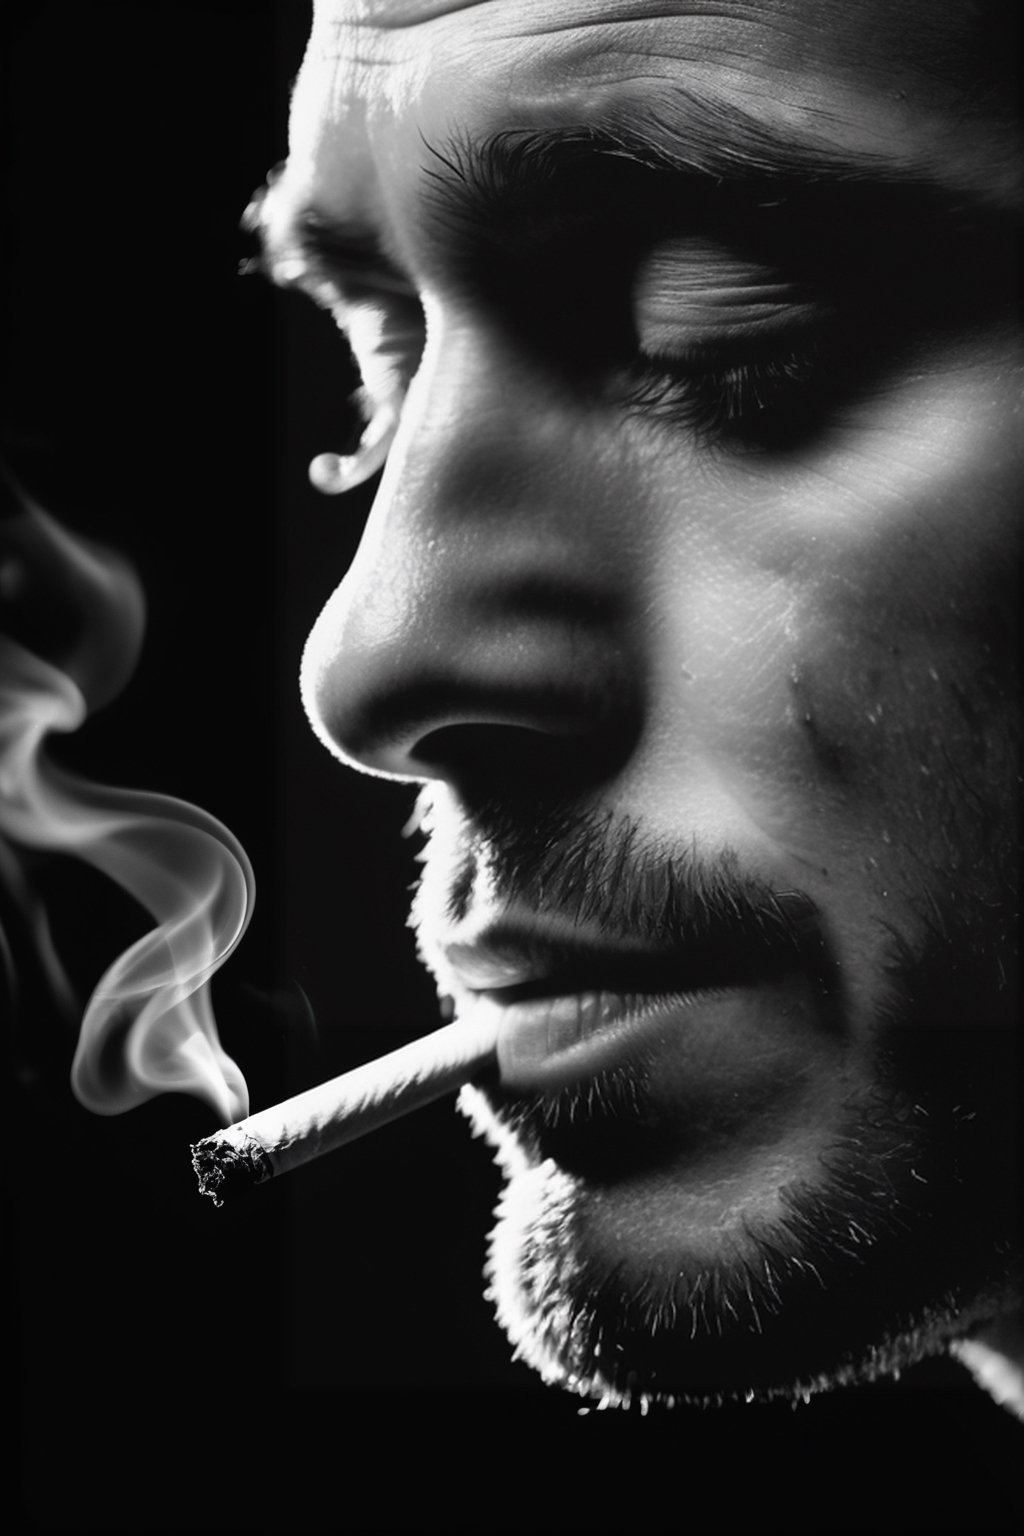 (chalkdust:1.2) Realistic photograph close up of man face side profile obscured by a cigarette smok coming out of lips, dark background, (smoke tendrils:1.3) curling and twisting in slow, (dancing:1.2) motions, (stark contrast:1.1) (monochrome:1.2) (high contrast:1.1) (fine detail:1.3) (high resolution:1.2)